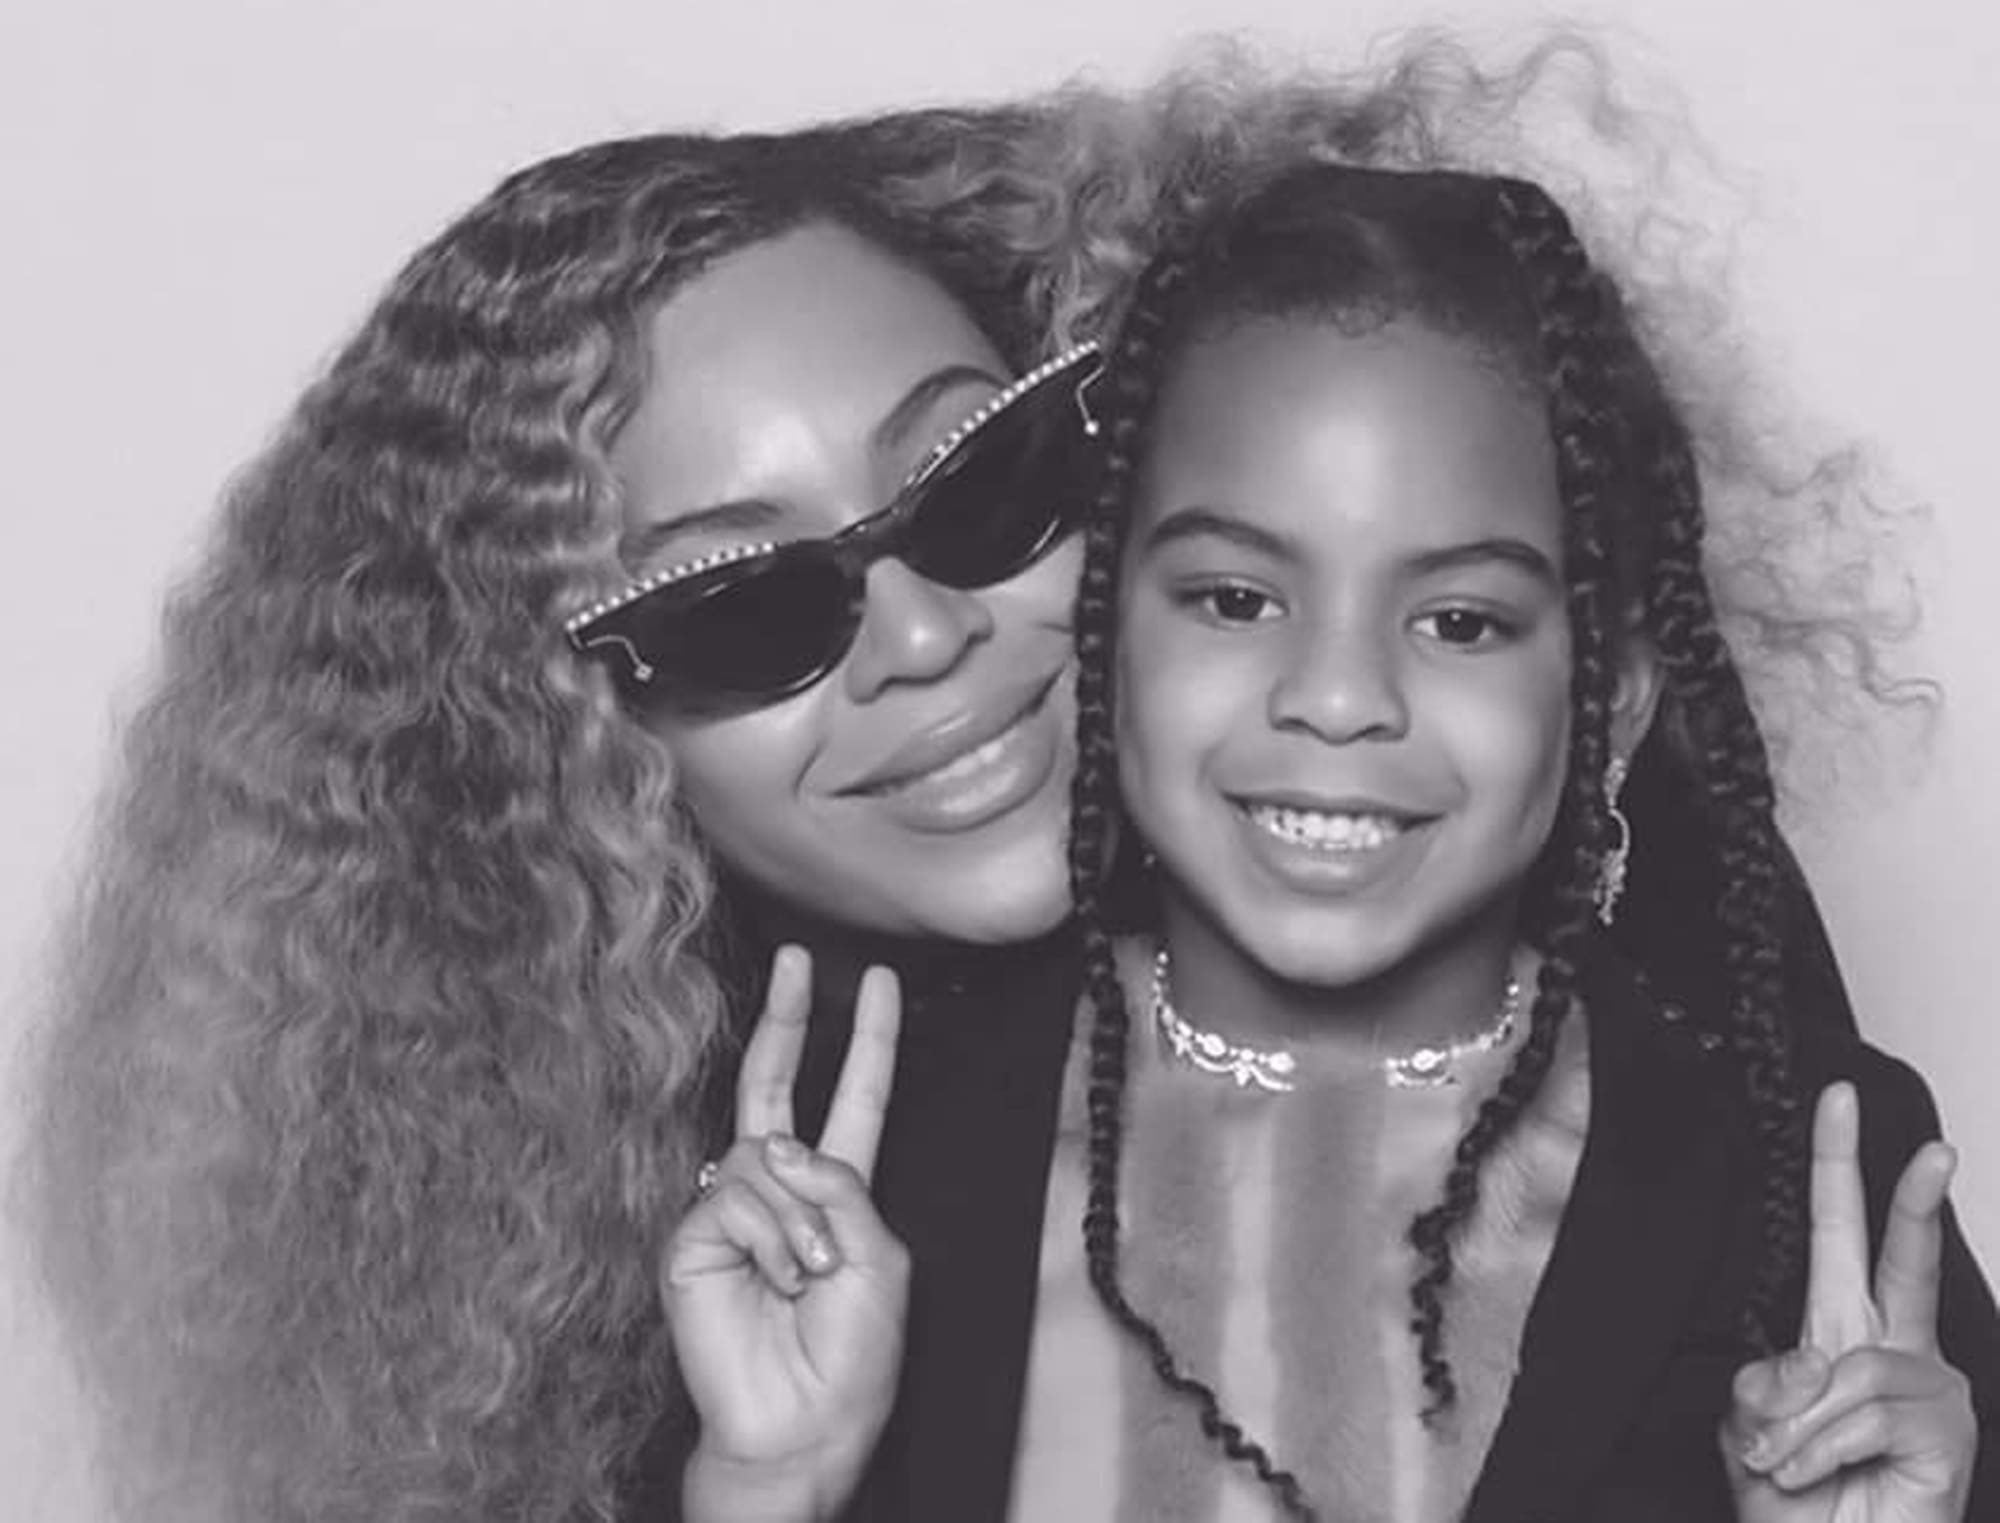 Jay Zs Daughter Blue Ivy Carter Might Soon Overshadow Beyonce As She Delivers Fantastic